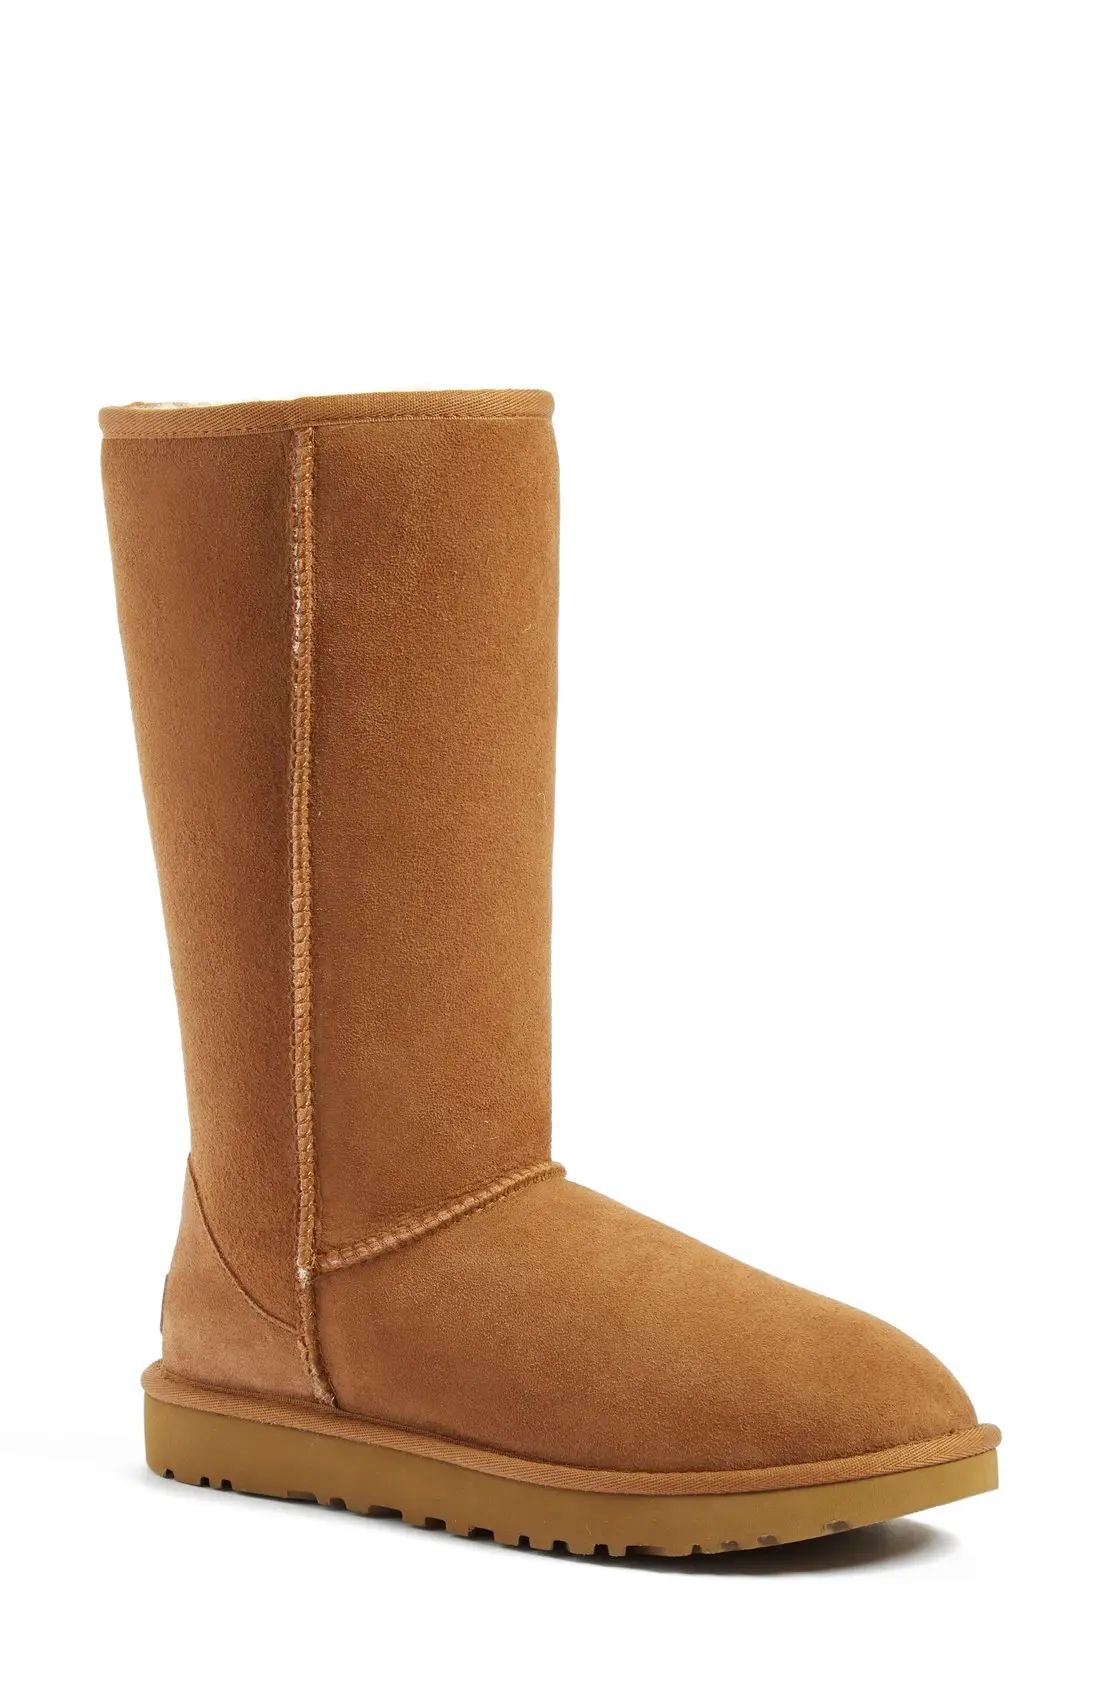 'Classic II' Genuine Shearling Lined Tall Boot | Nordstrom